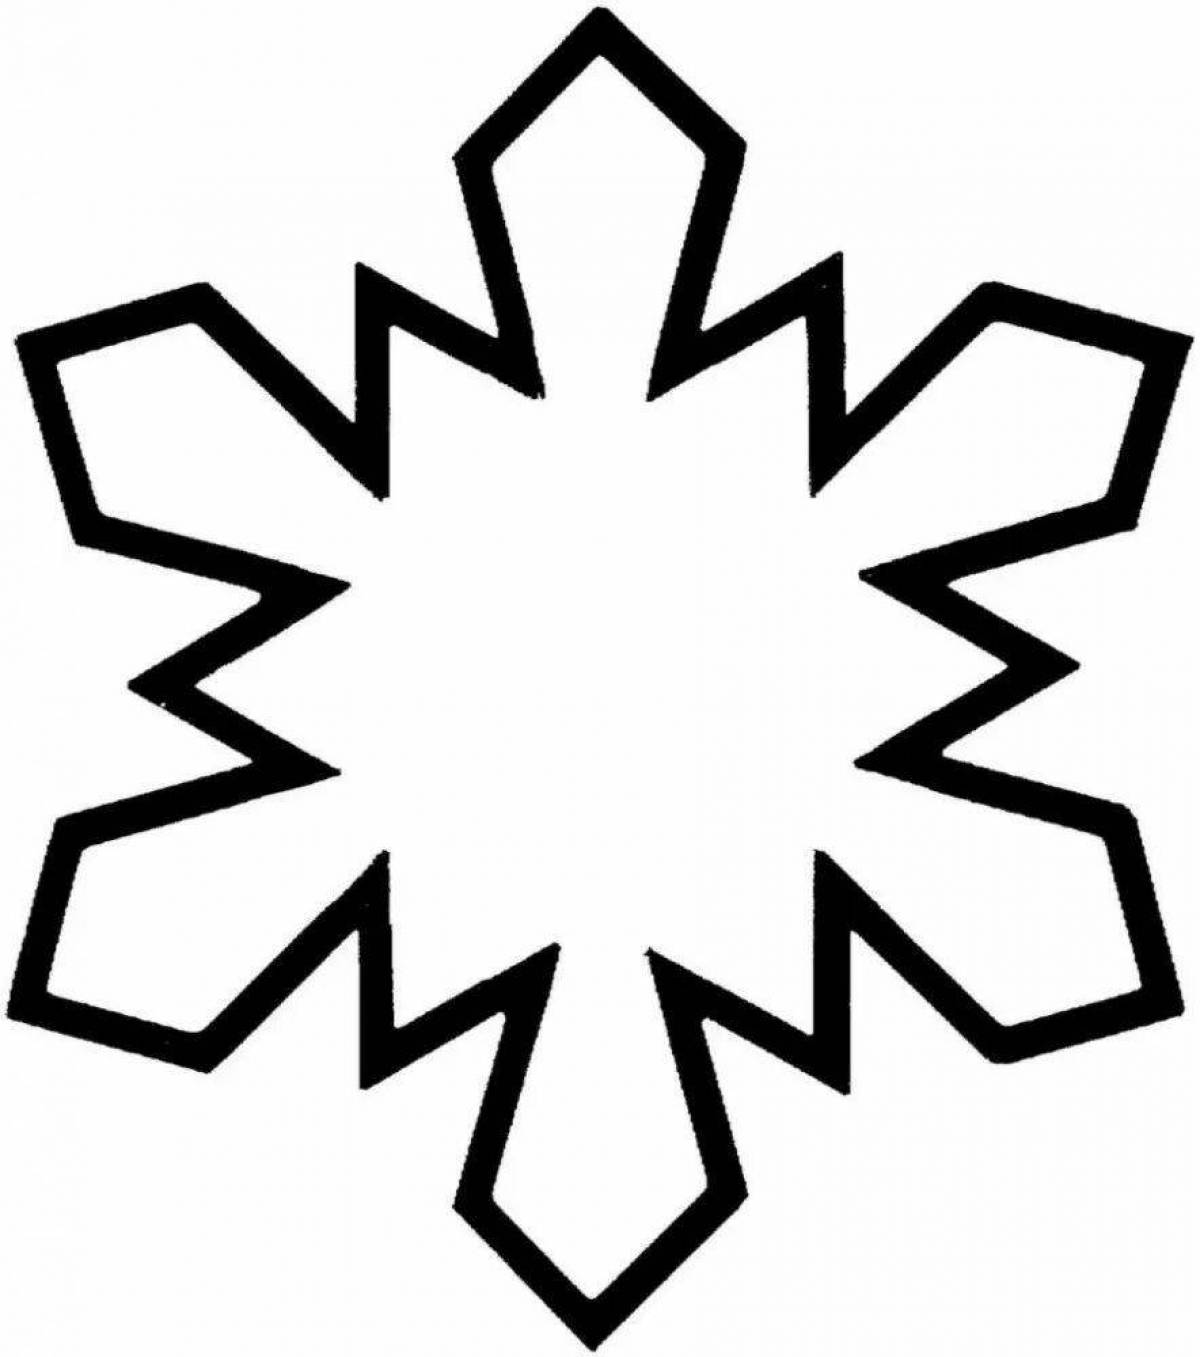 Glowing snowflake coloring book for kids